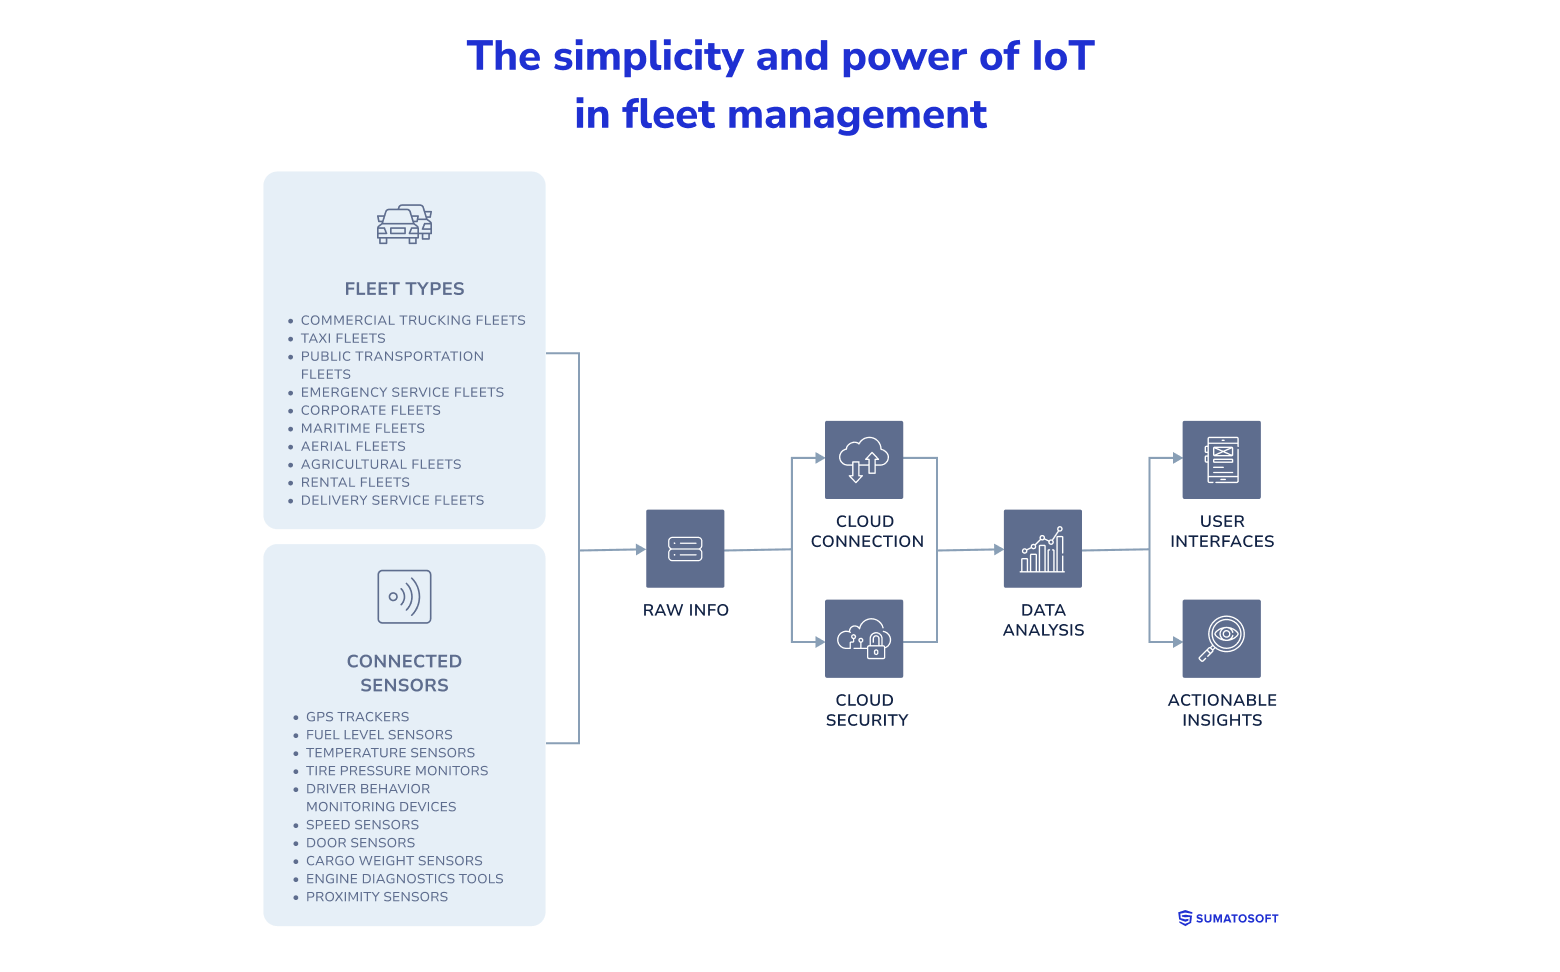 The simplicity and power of IoT in fleet management